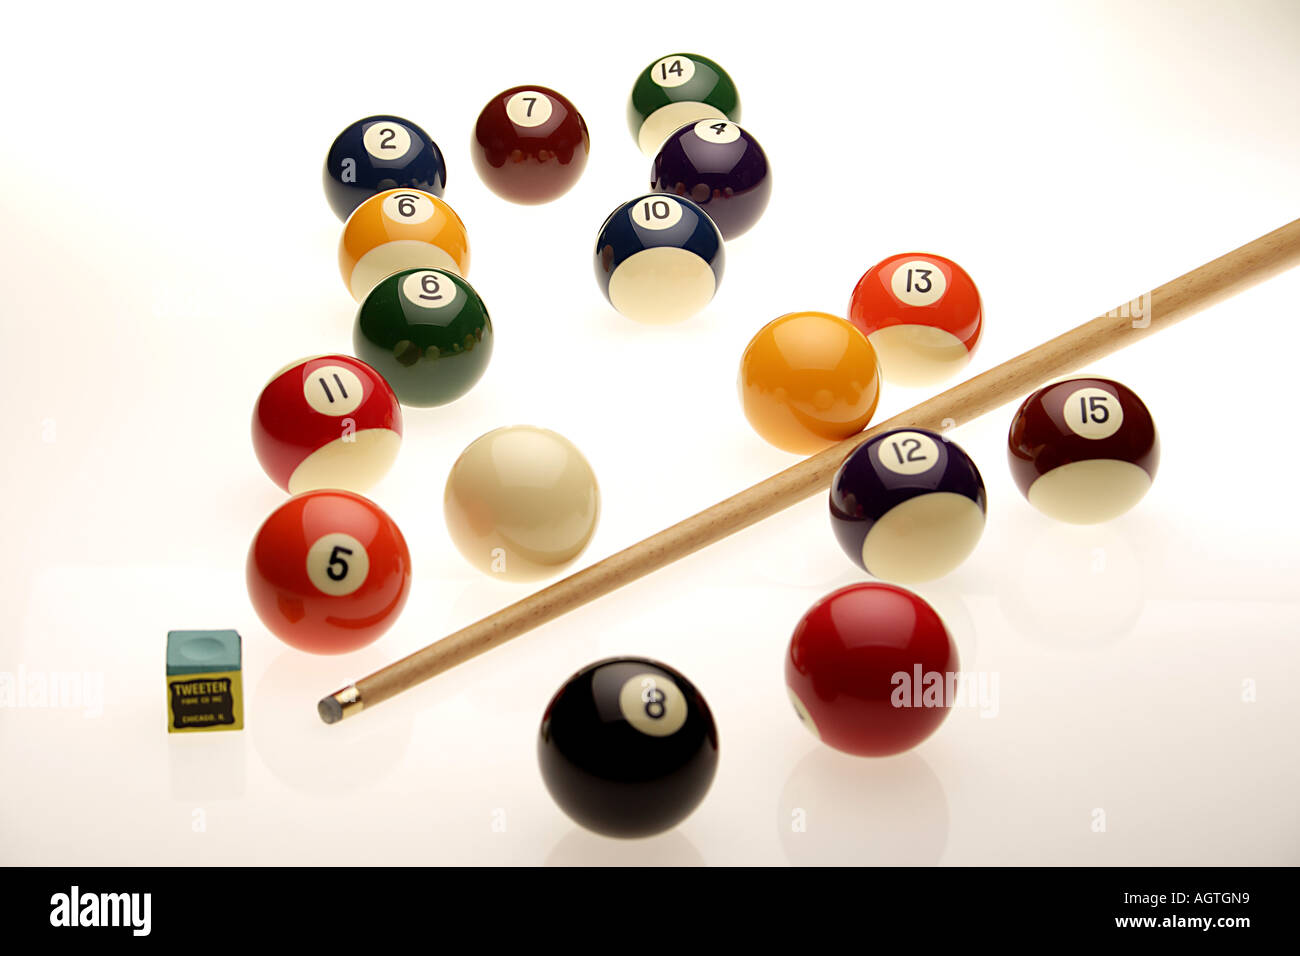 Snooker pool balls with cue and chalk on white background 2 7 14 6 4 10 11 5 13 12 15 8 round sphere circular indoor game sport Stock Photo